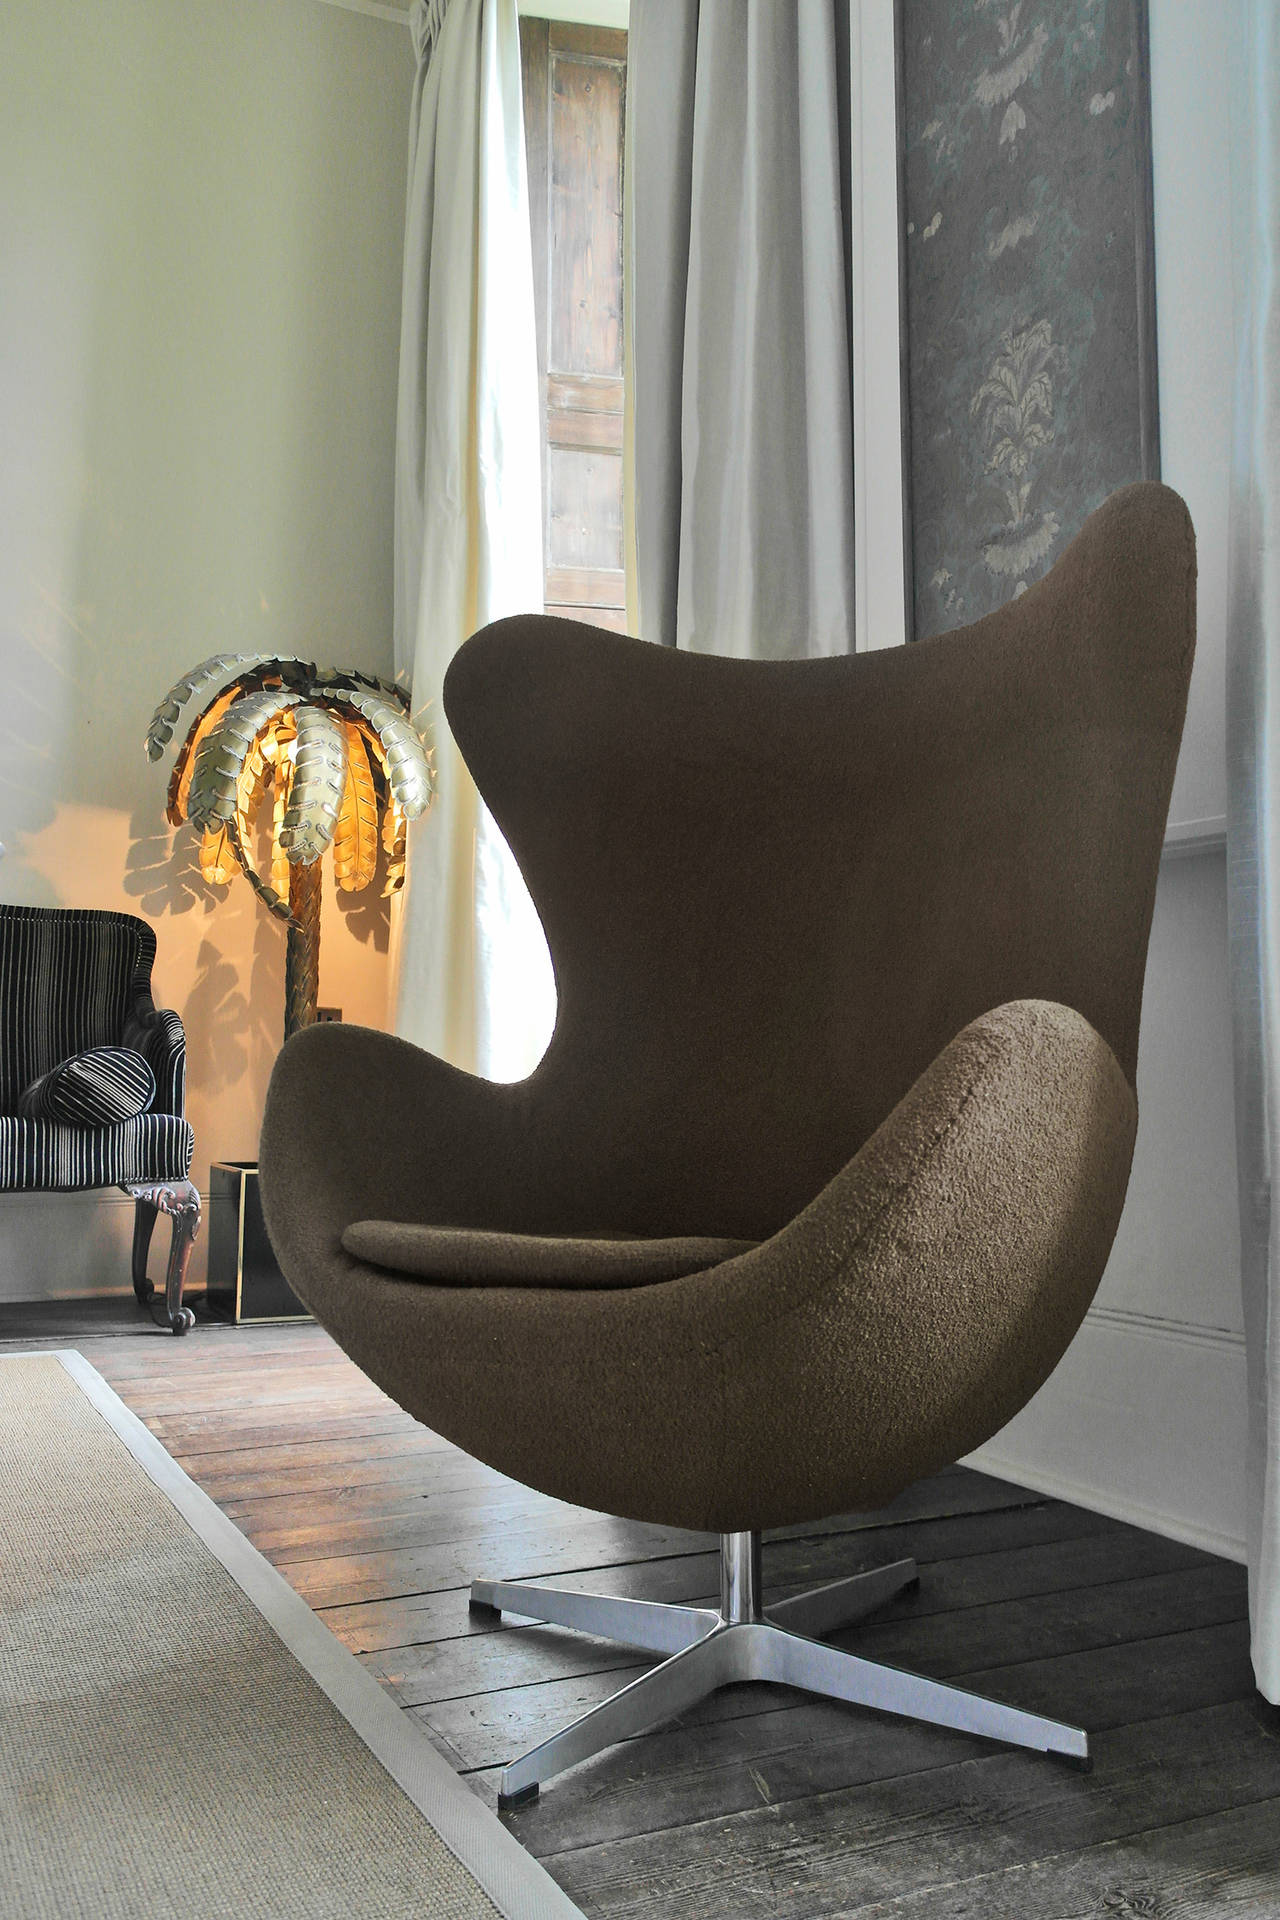 1960s iconic 'Egg' chair in the style of Arne Jacobsen in original brown wool upholstery.